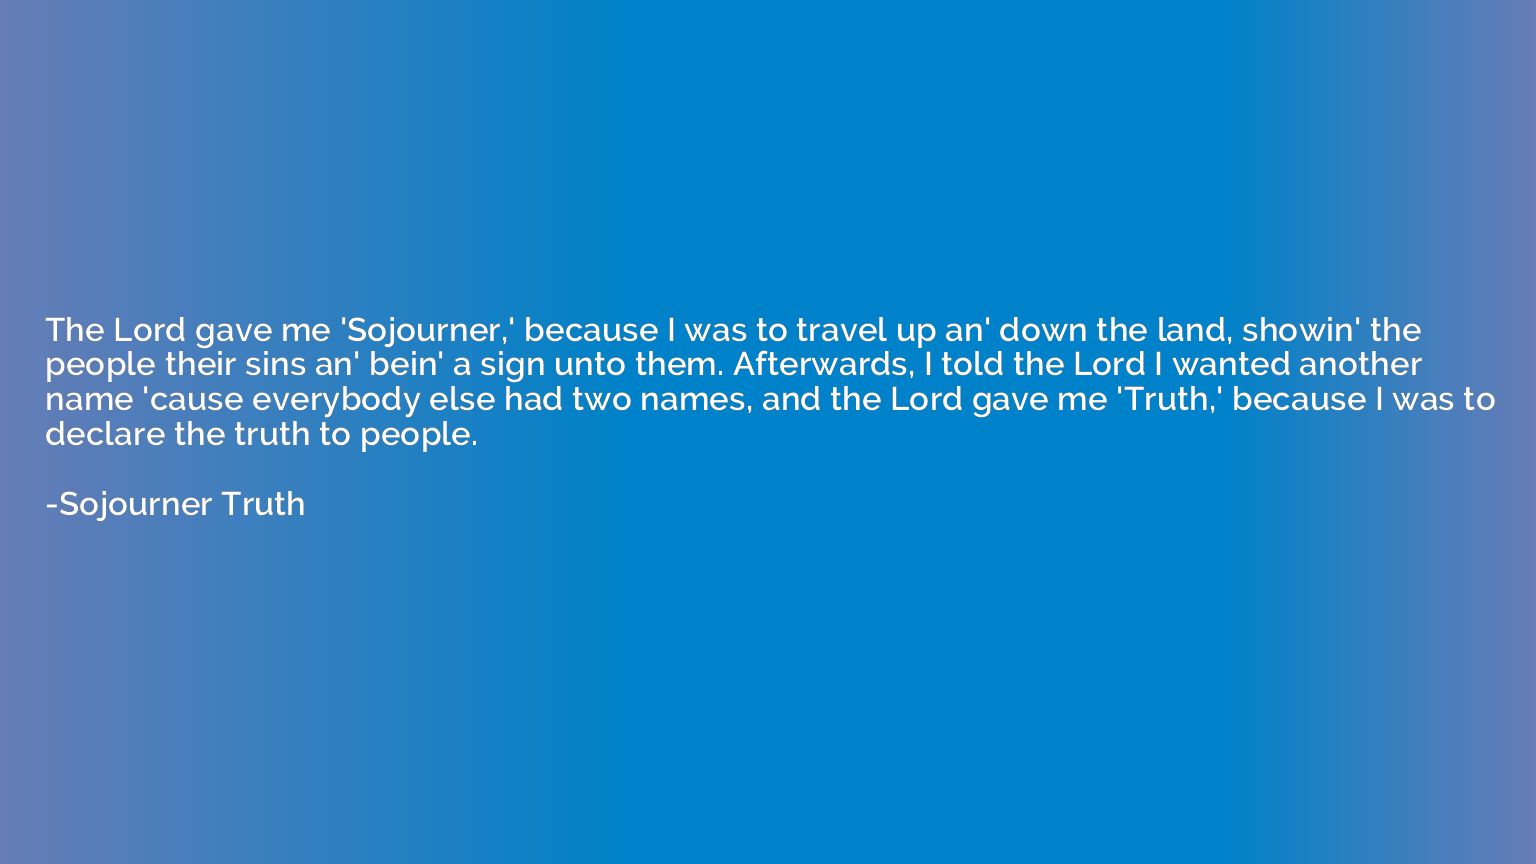 The Lord gave me 'Sojourner,' because I was to travel up an'